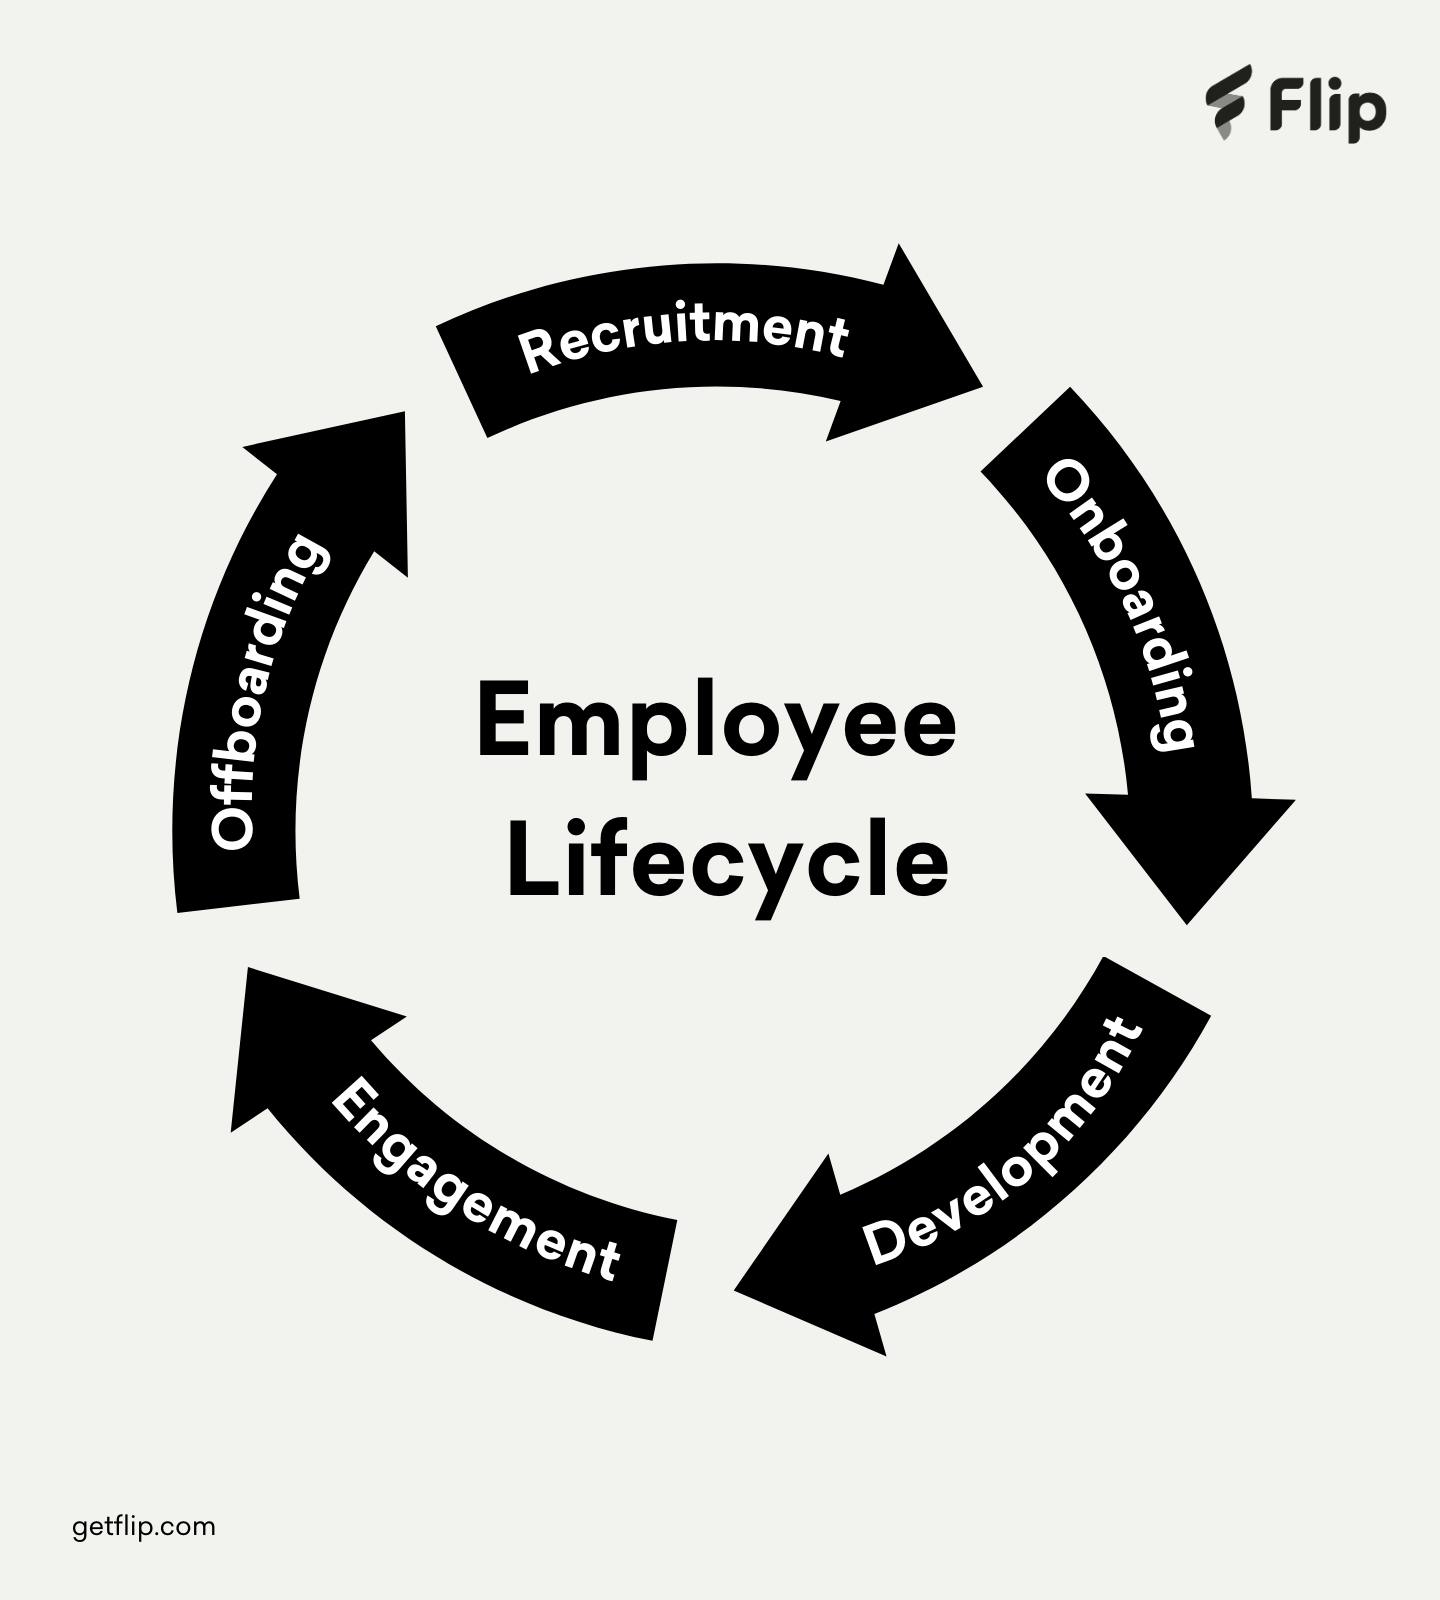 A visual portraying the employee lifecycle